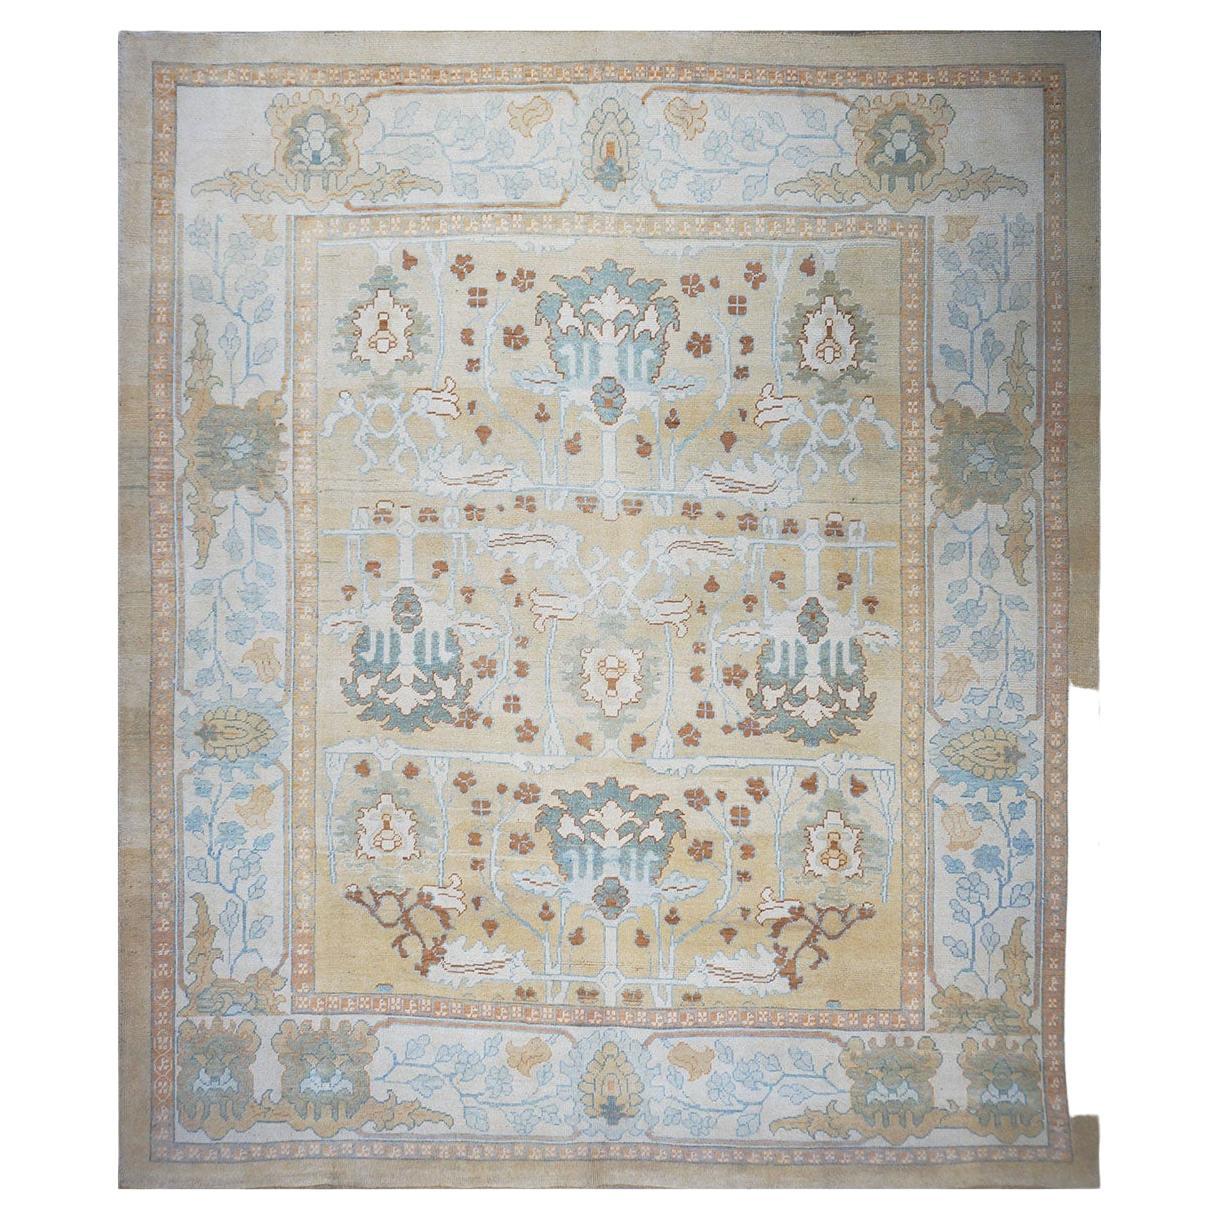 Donegal-inspired oriental rug handwoven on our looms Exclusive Ashly Master Donegal production of 100% hand-spun vegetable-dyed wool. This rug is made with the exact methods from which they were made in the 1800s, it has a 1/4 inch thick pile. This